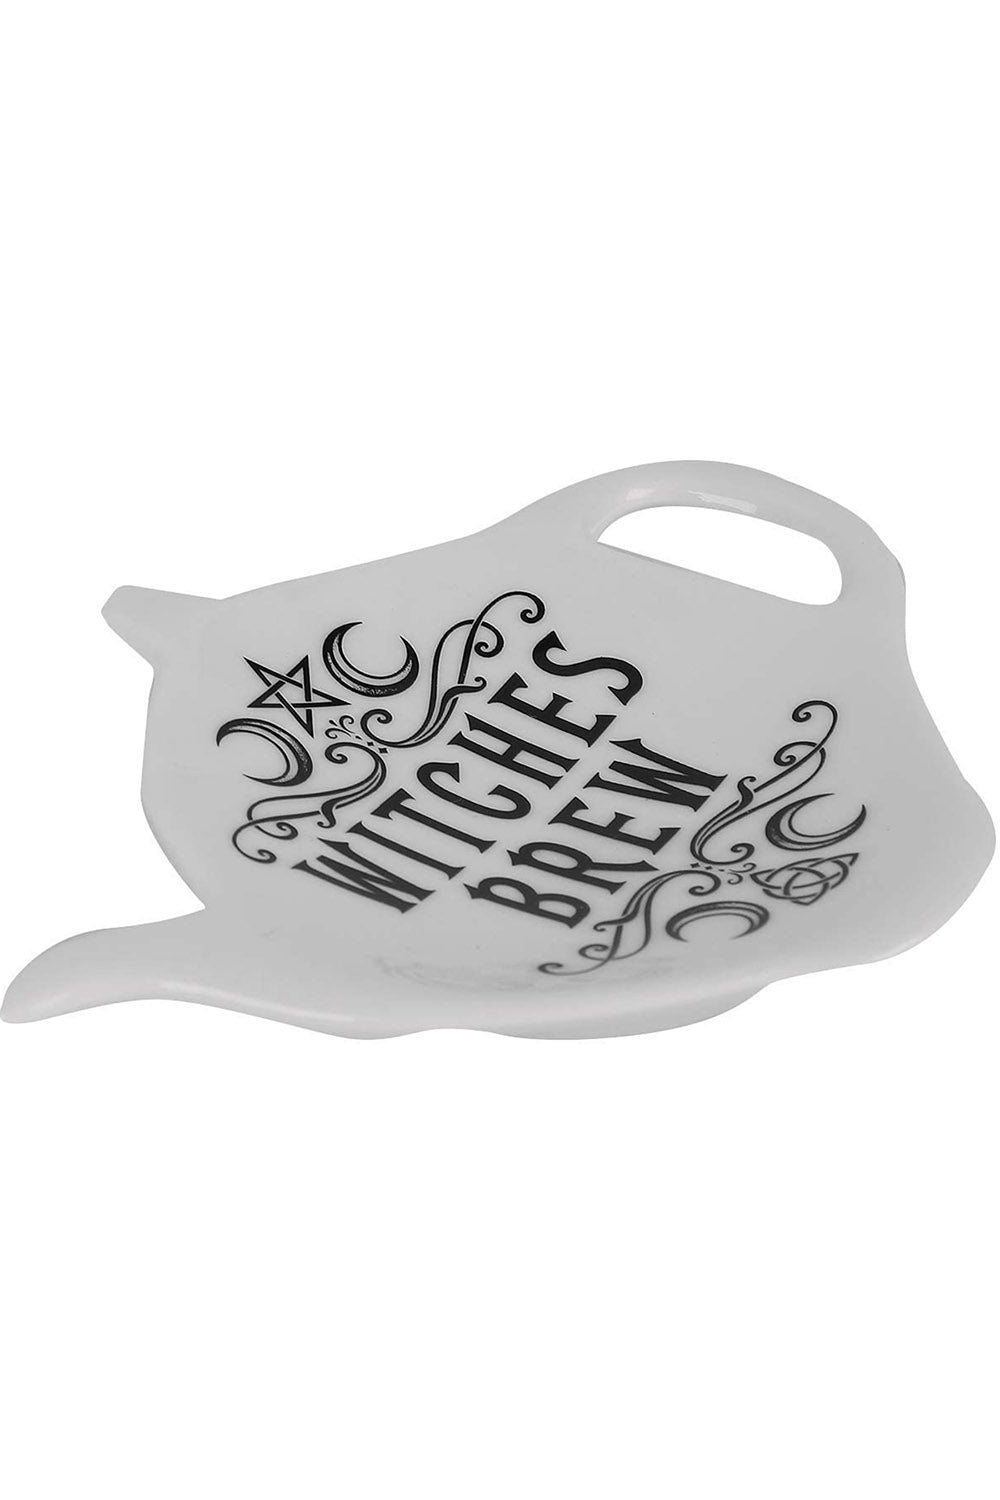 Witches Brew Tea Spoon Holder